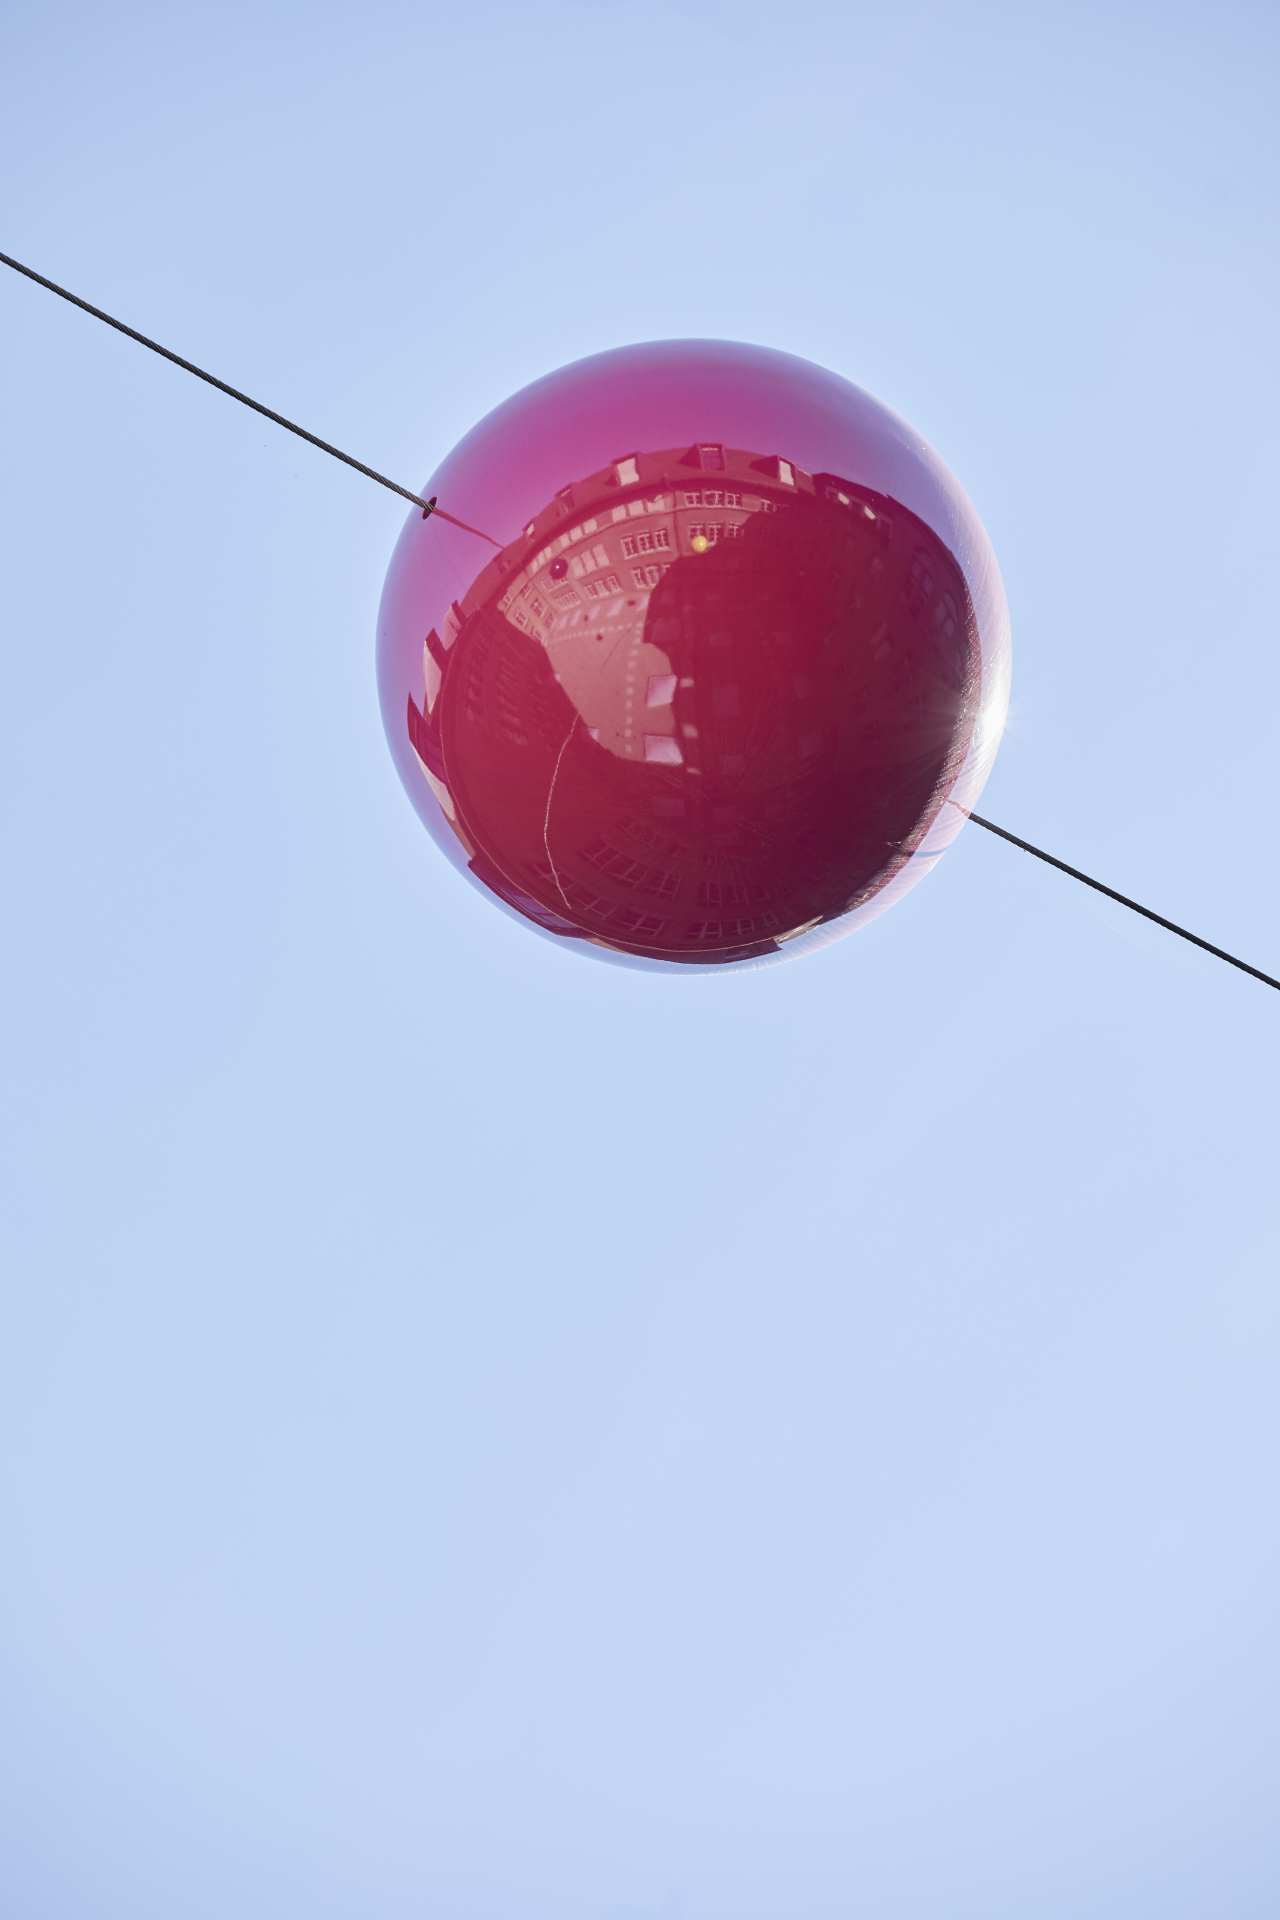 Red plastic ball on a cable as part of the installation